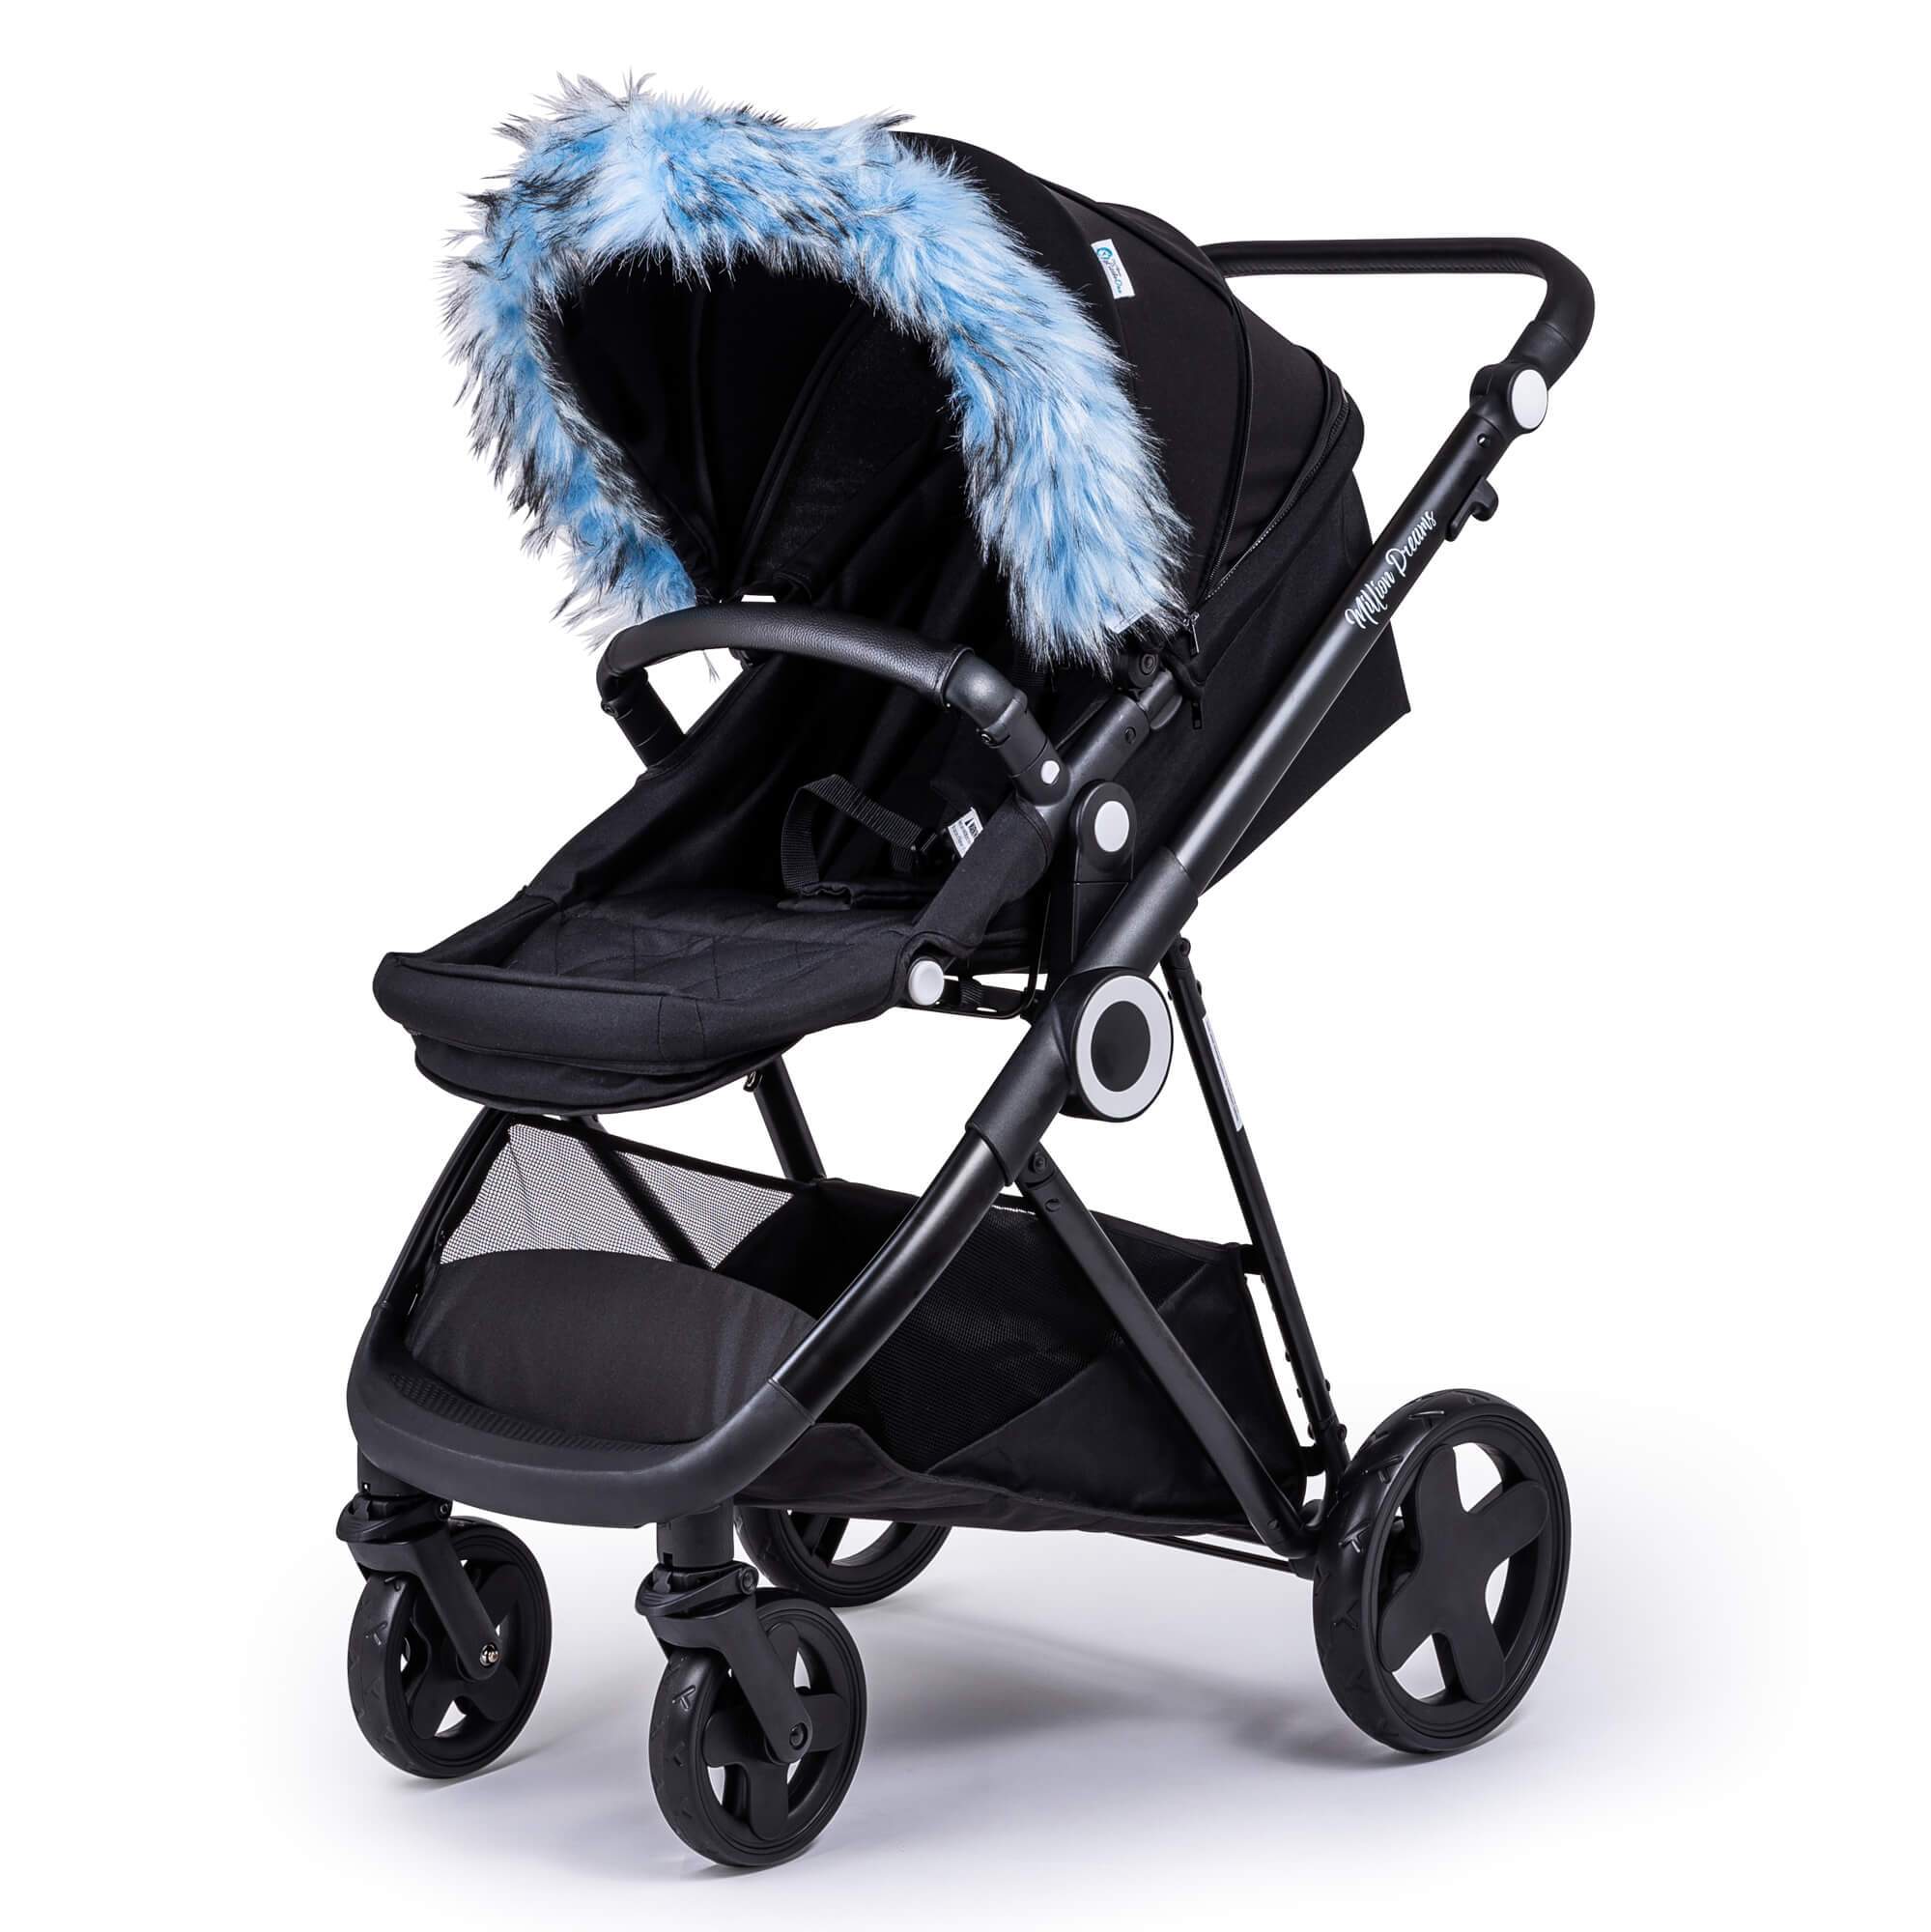 Pram Fur Hood Trim Attachment for Pushchair Compatible with Chicco - Light Blue / Fits All Models | For Your Little One